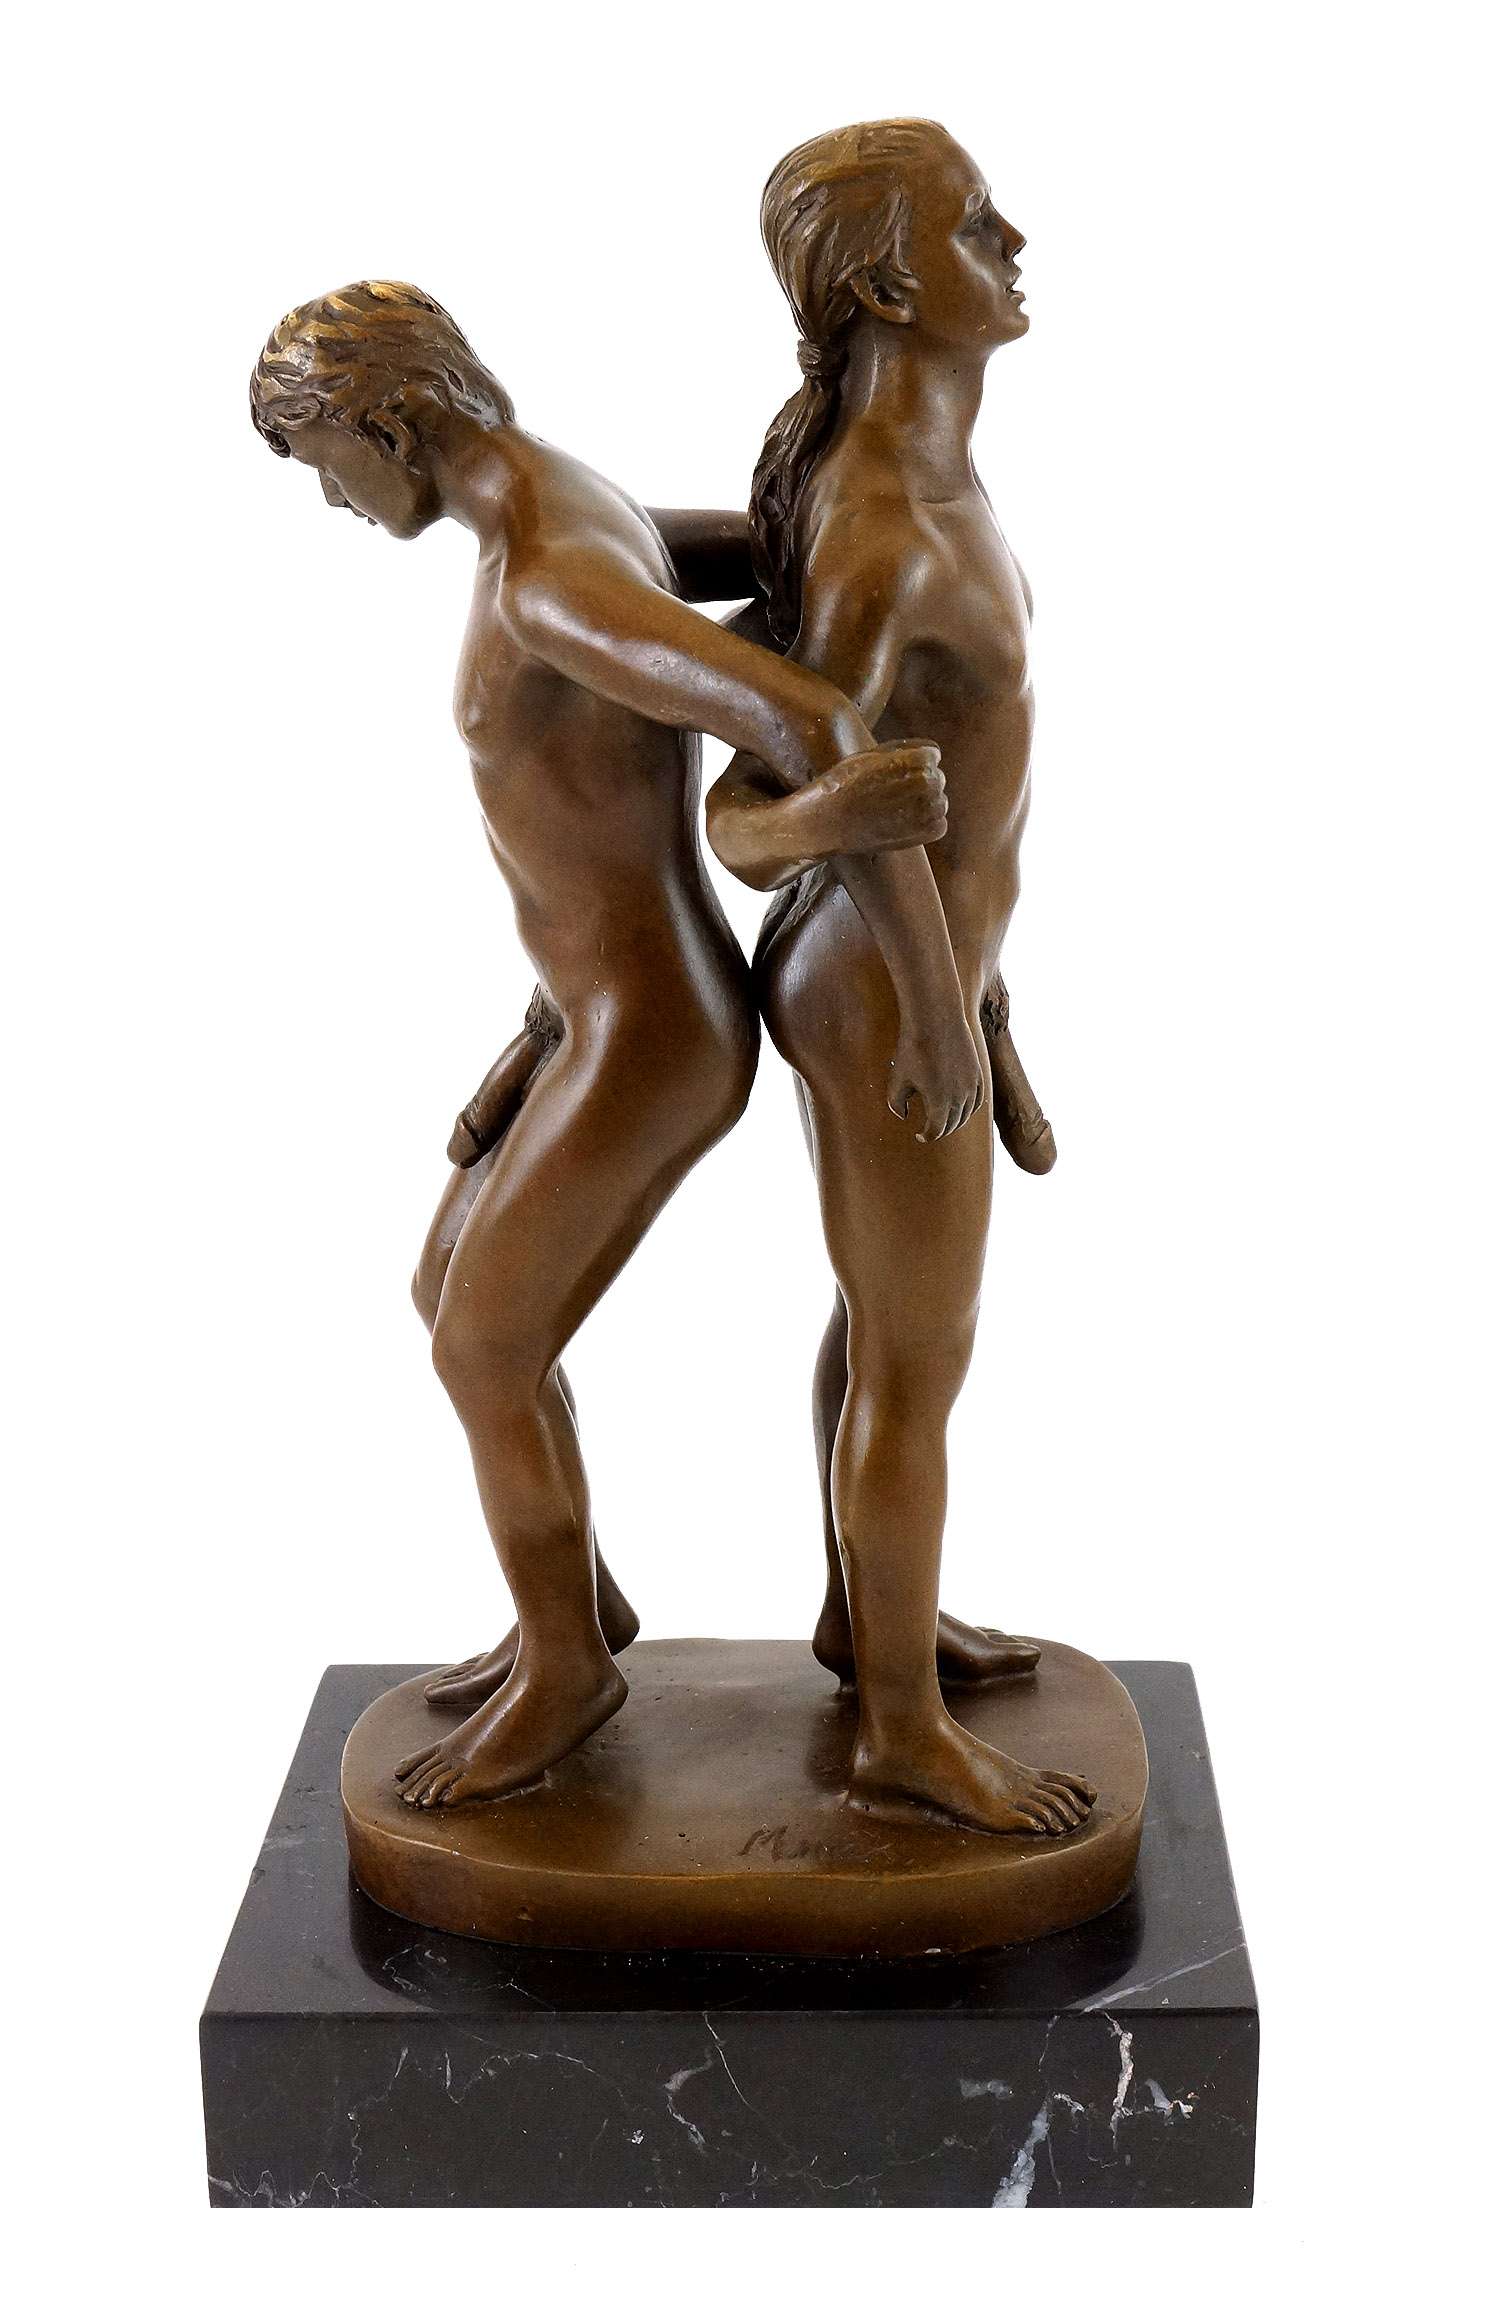 Hard-Boiled reccomend Erotic gay figurines